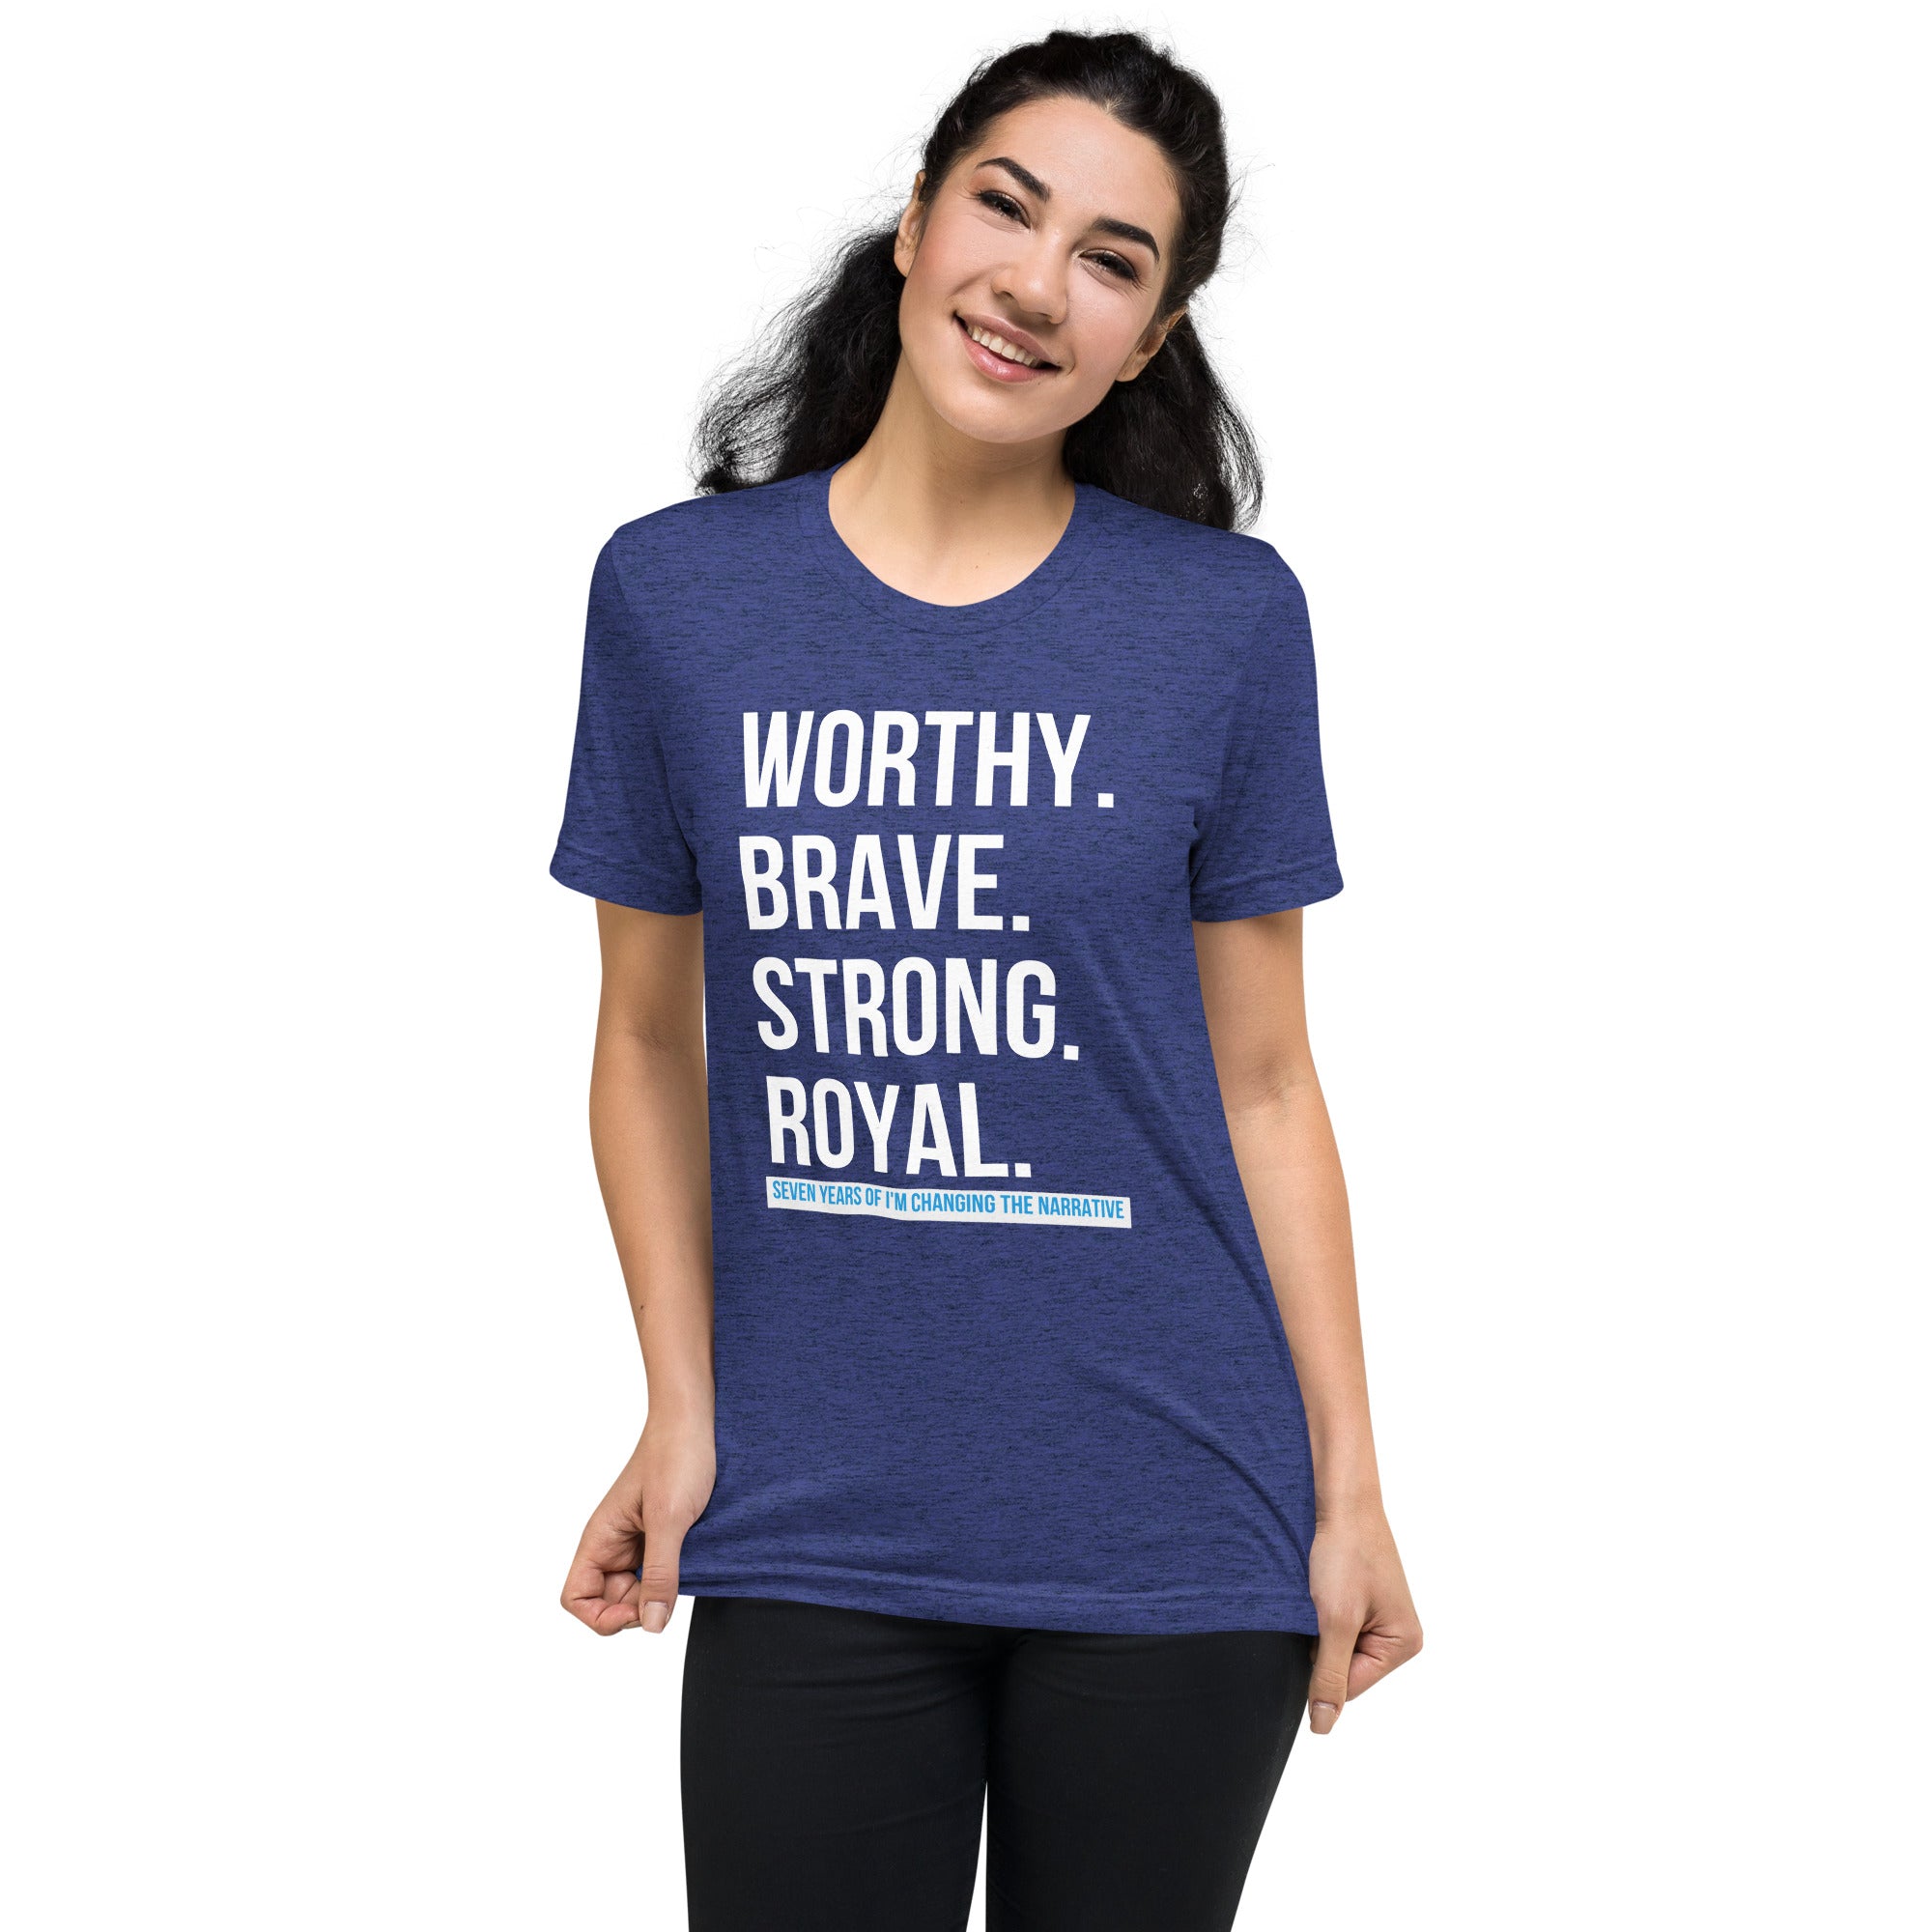 Worthy, Brave, Strong - Short sleeve t-shirt